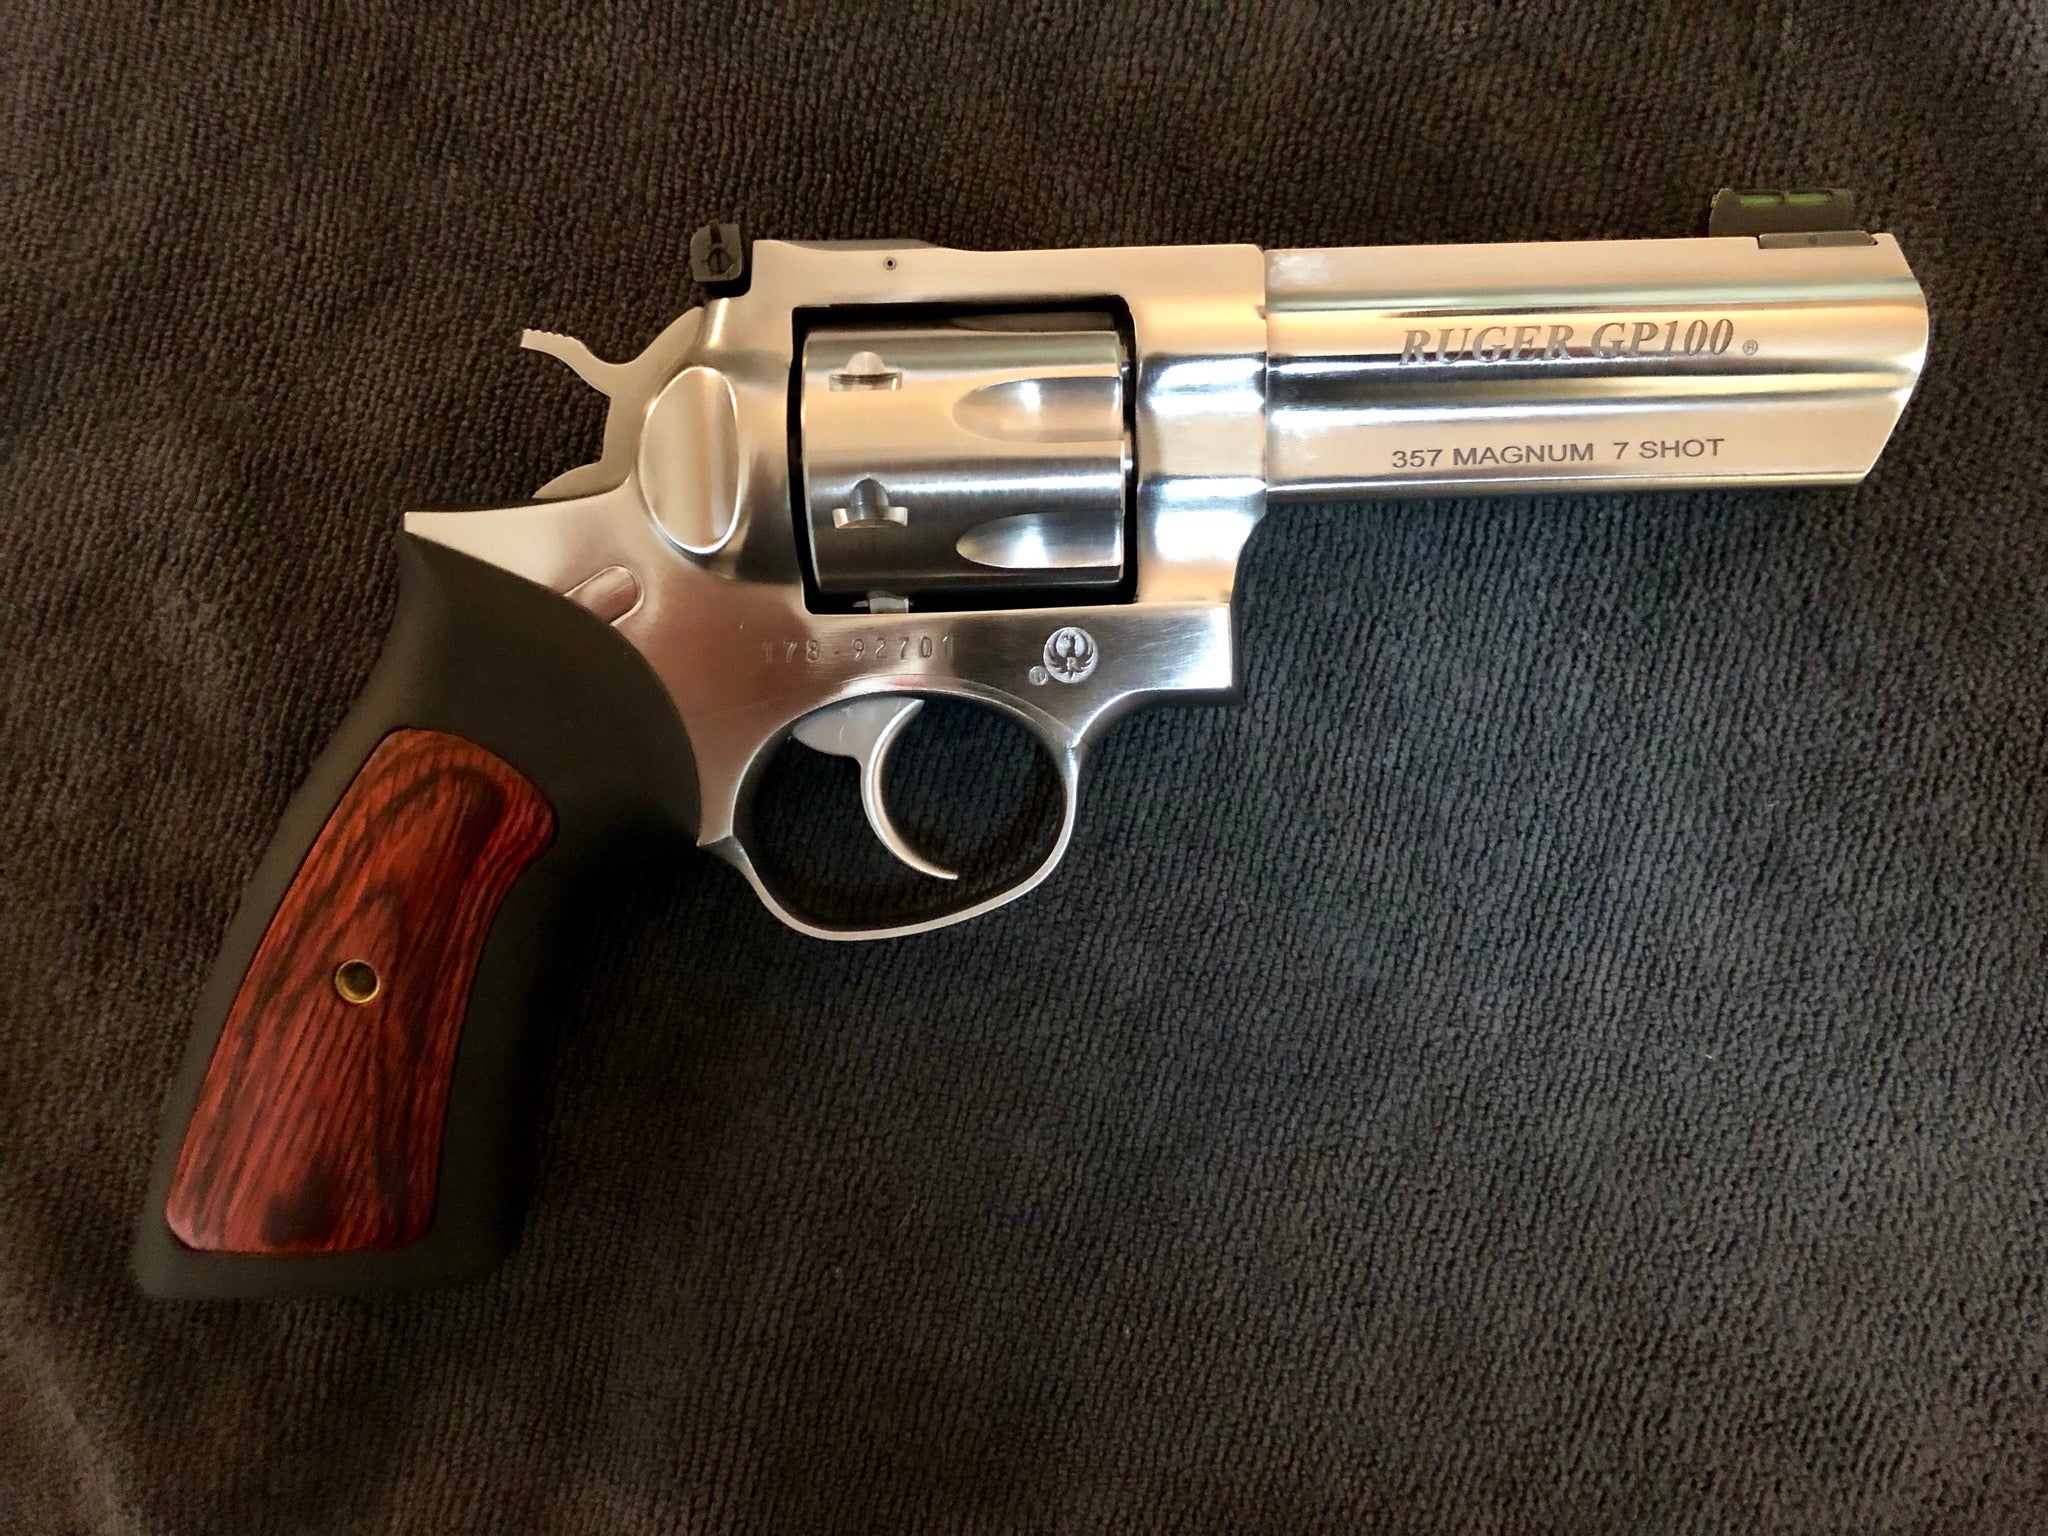 Finally A Great Gp100 357 Seven Shot Review Ruger Forum